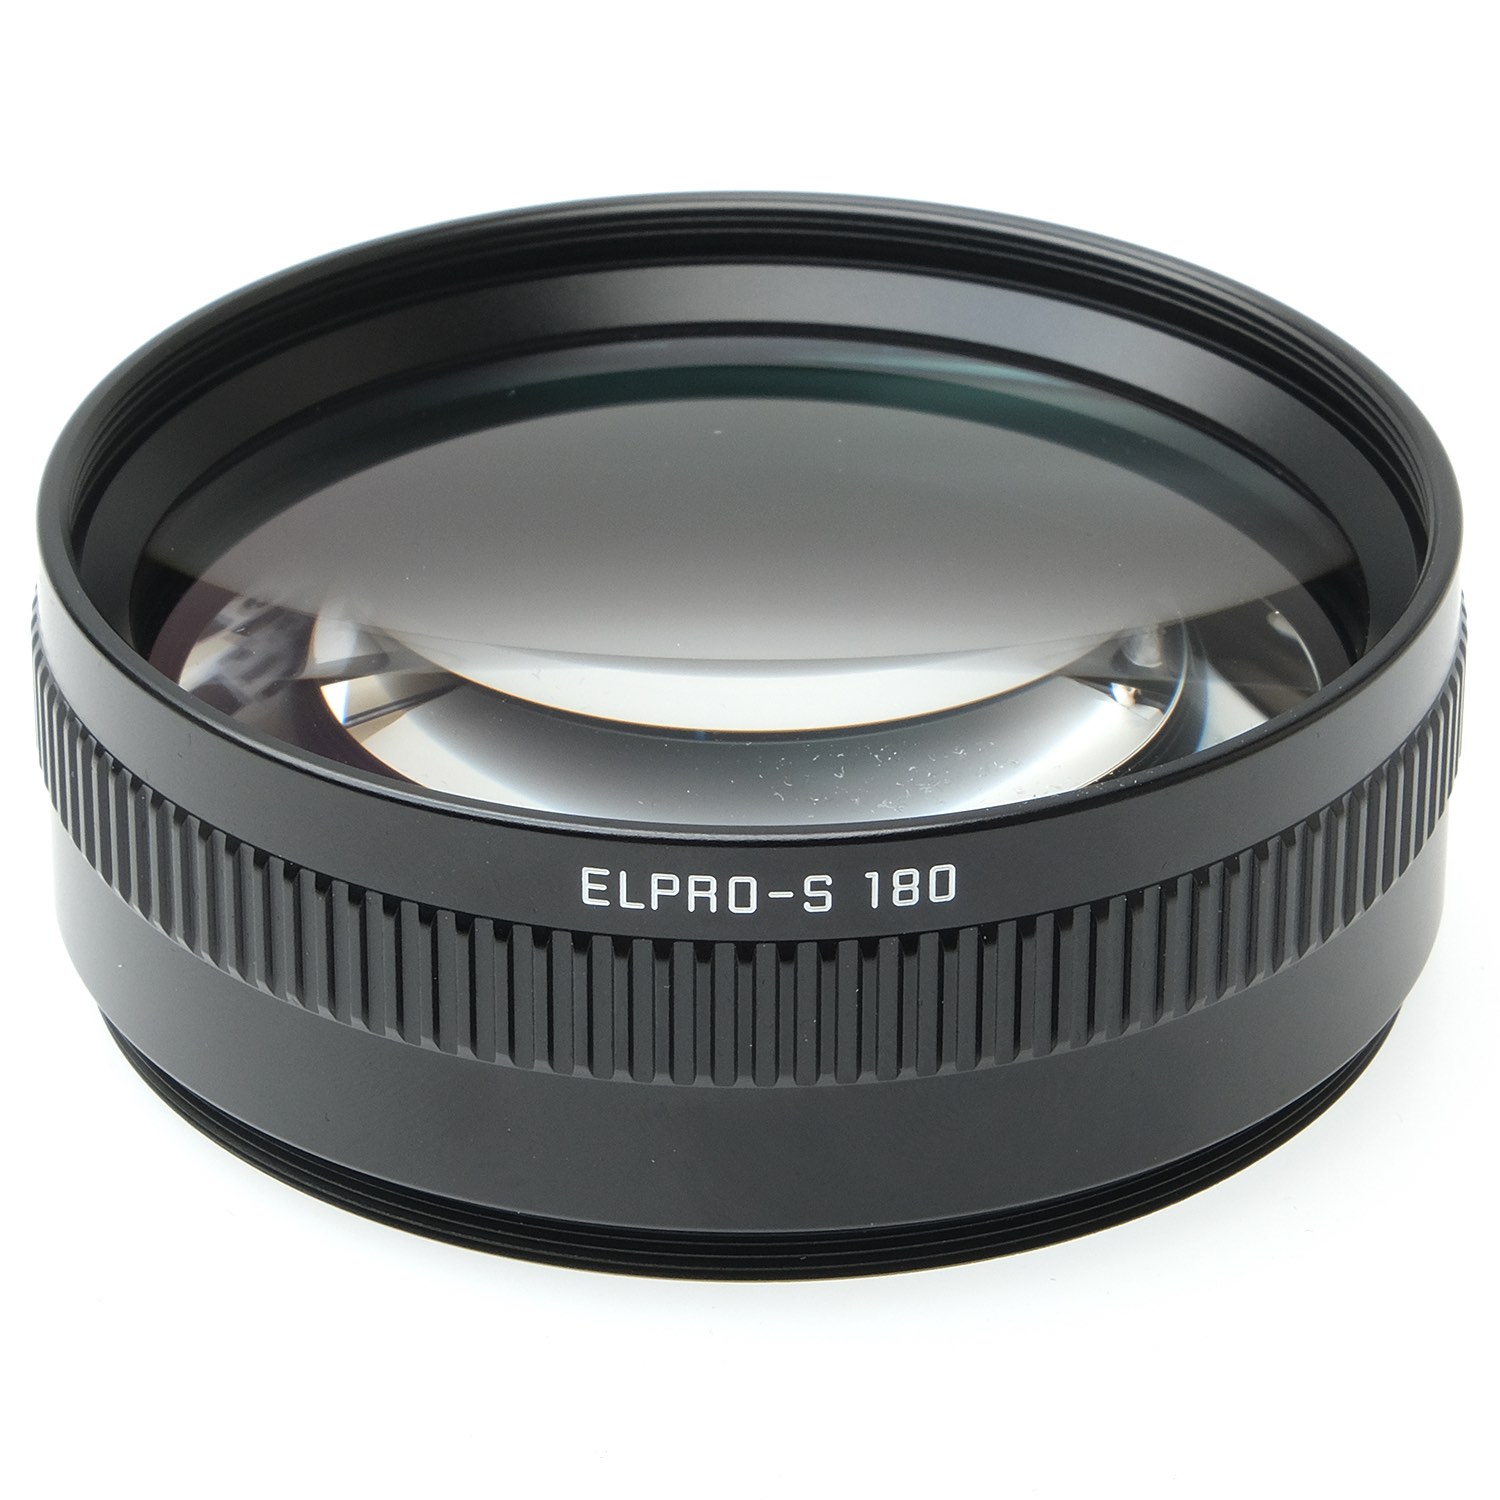 Leica Elpro-S 180, Boxed (10-)